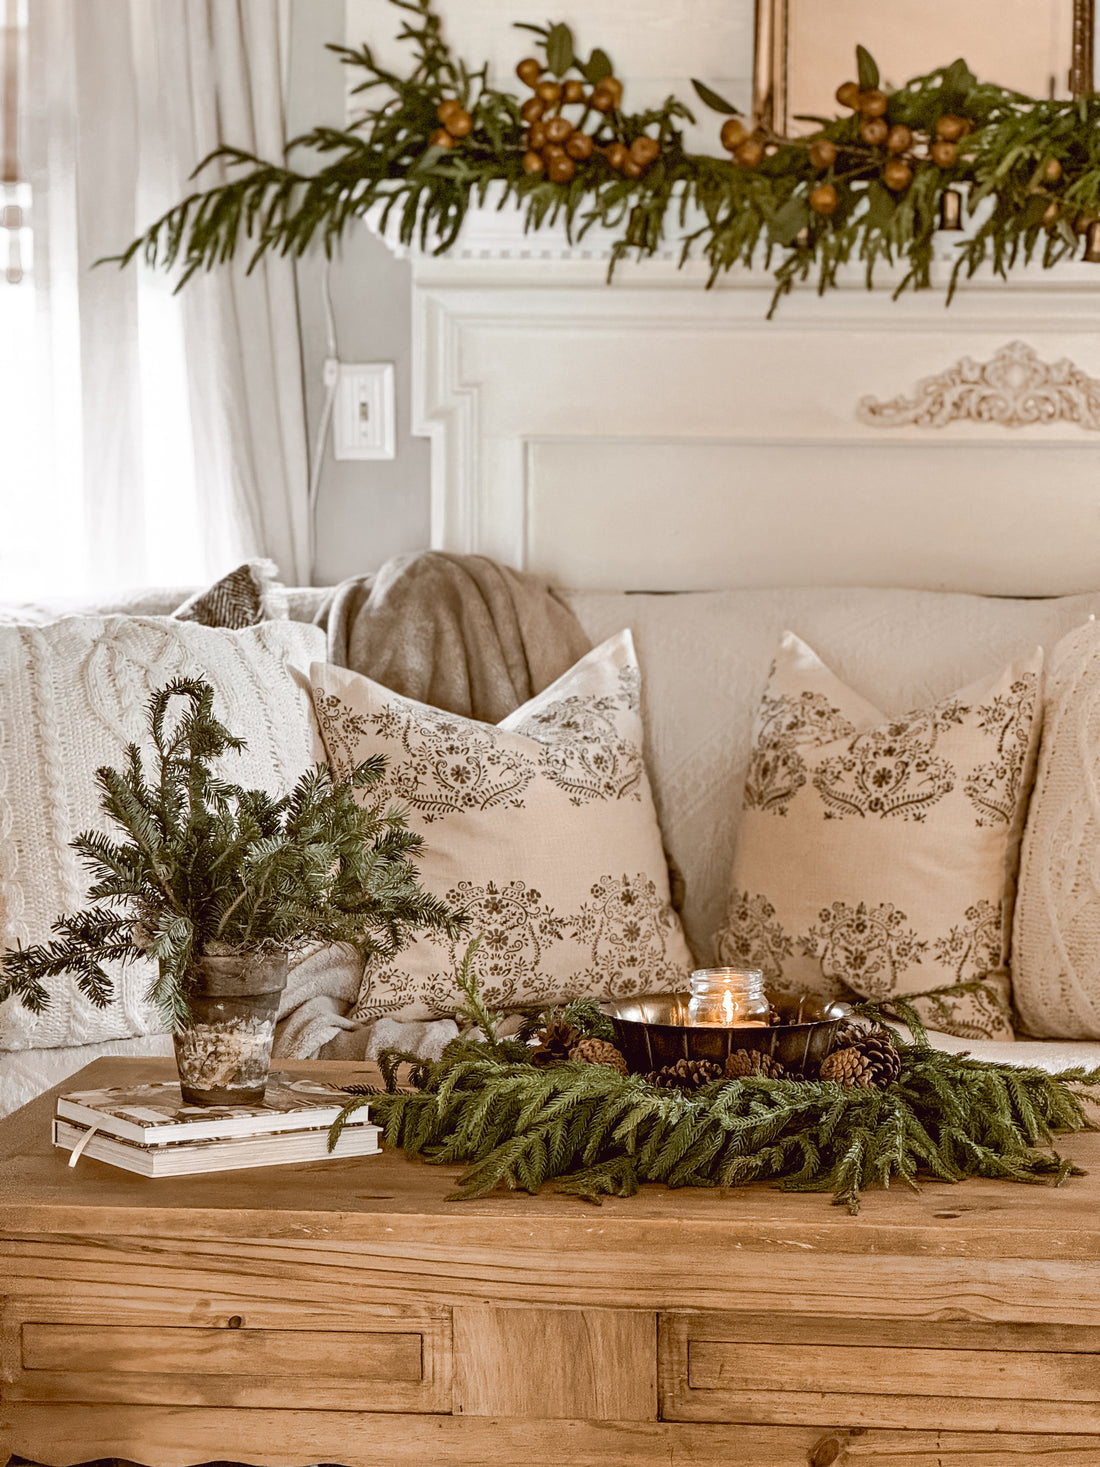 Evergreen Elegance: Tips for Decorating with Christmas Tree Clippings